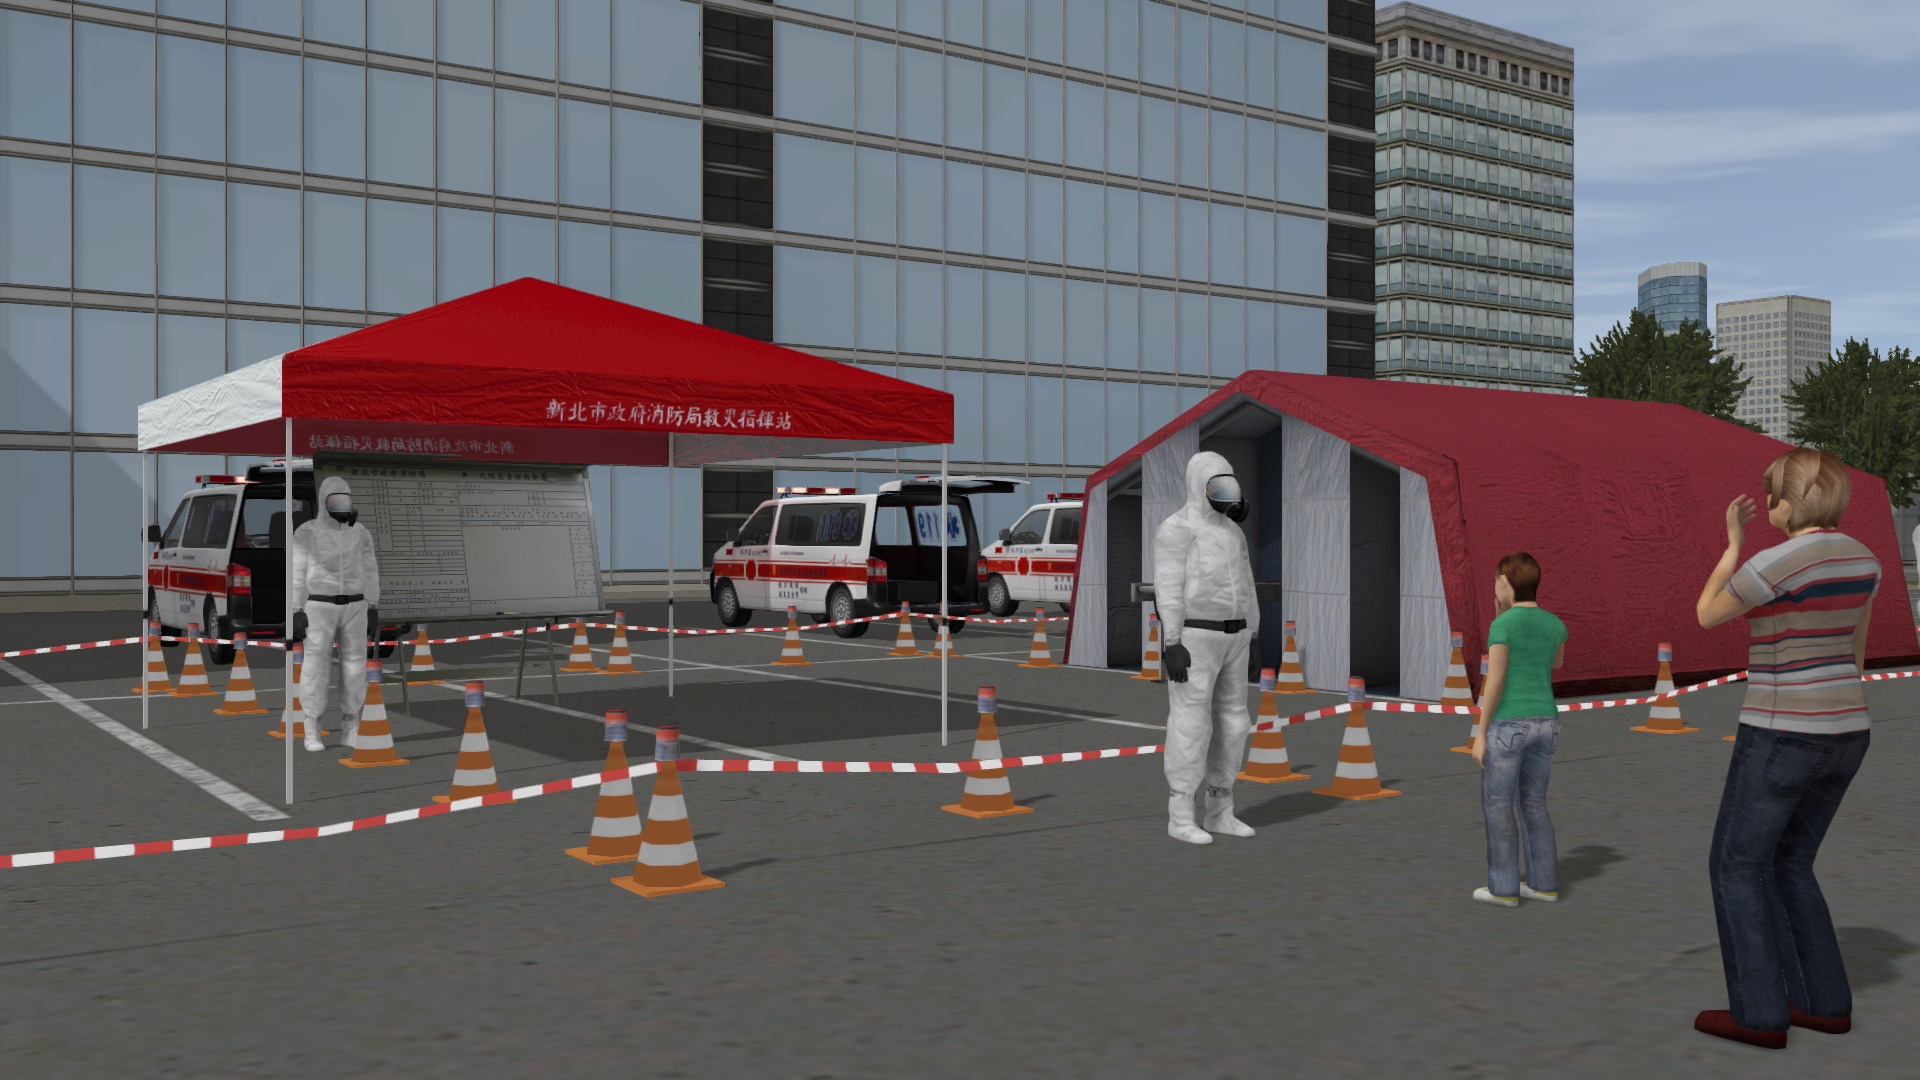 COVID-19 virus testing location, simulated in ADMS to prepare for handling, command, and logistics training.